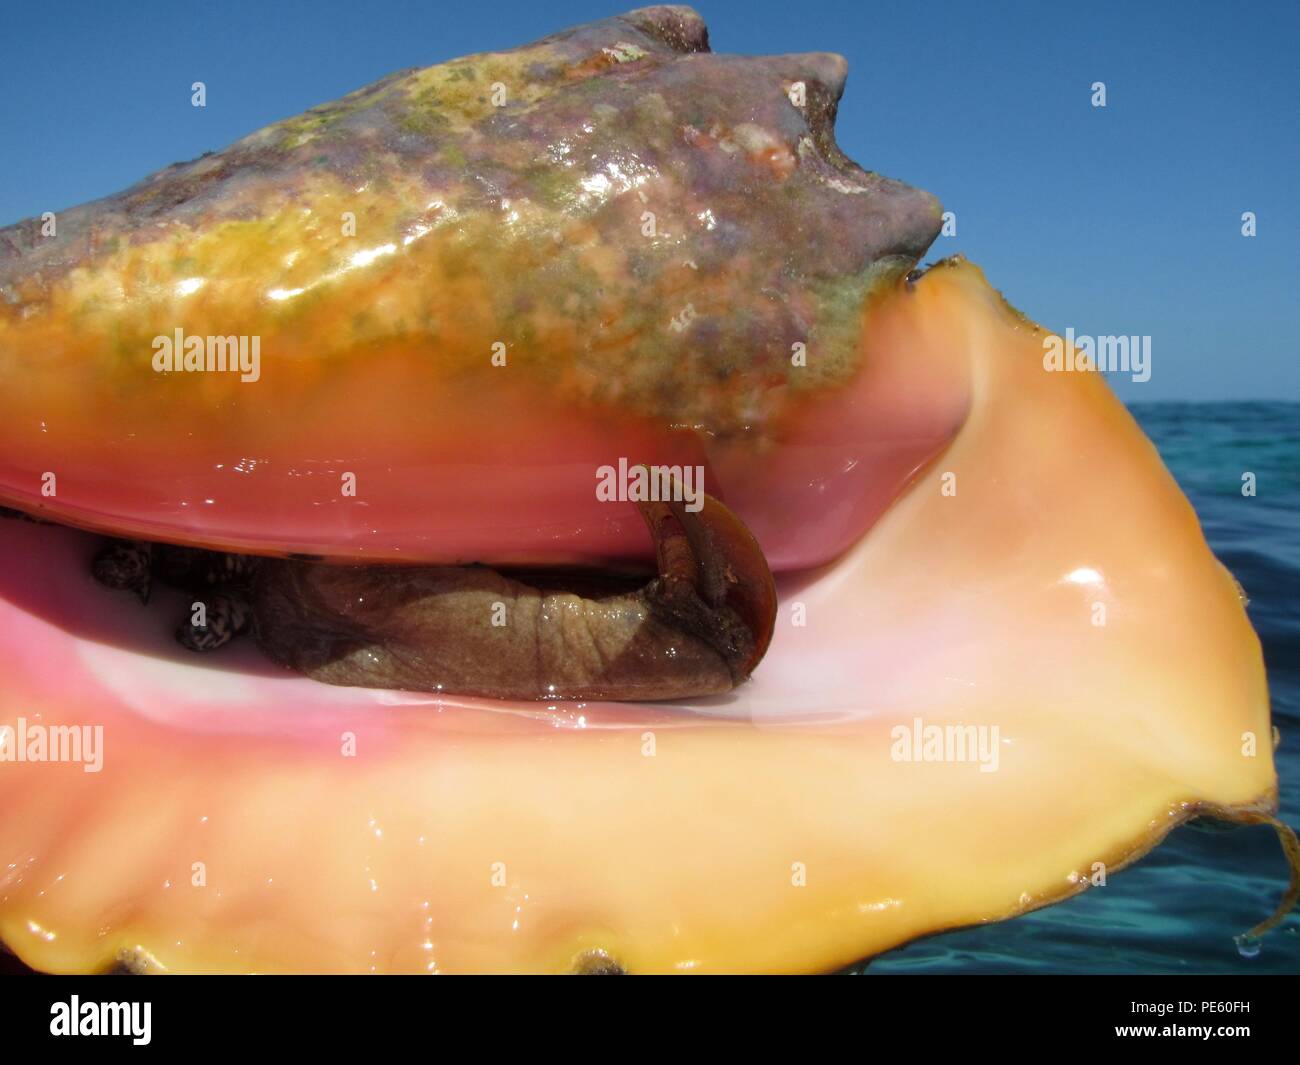 A queen conch a huge marine snail and local delicacy in Belize Stock Photo